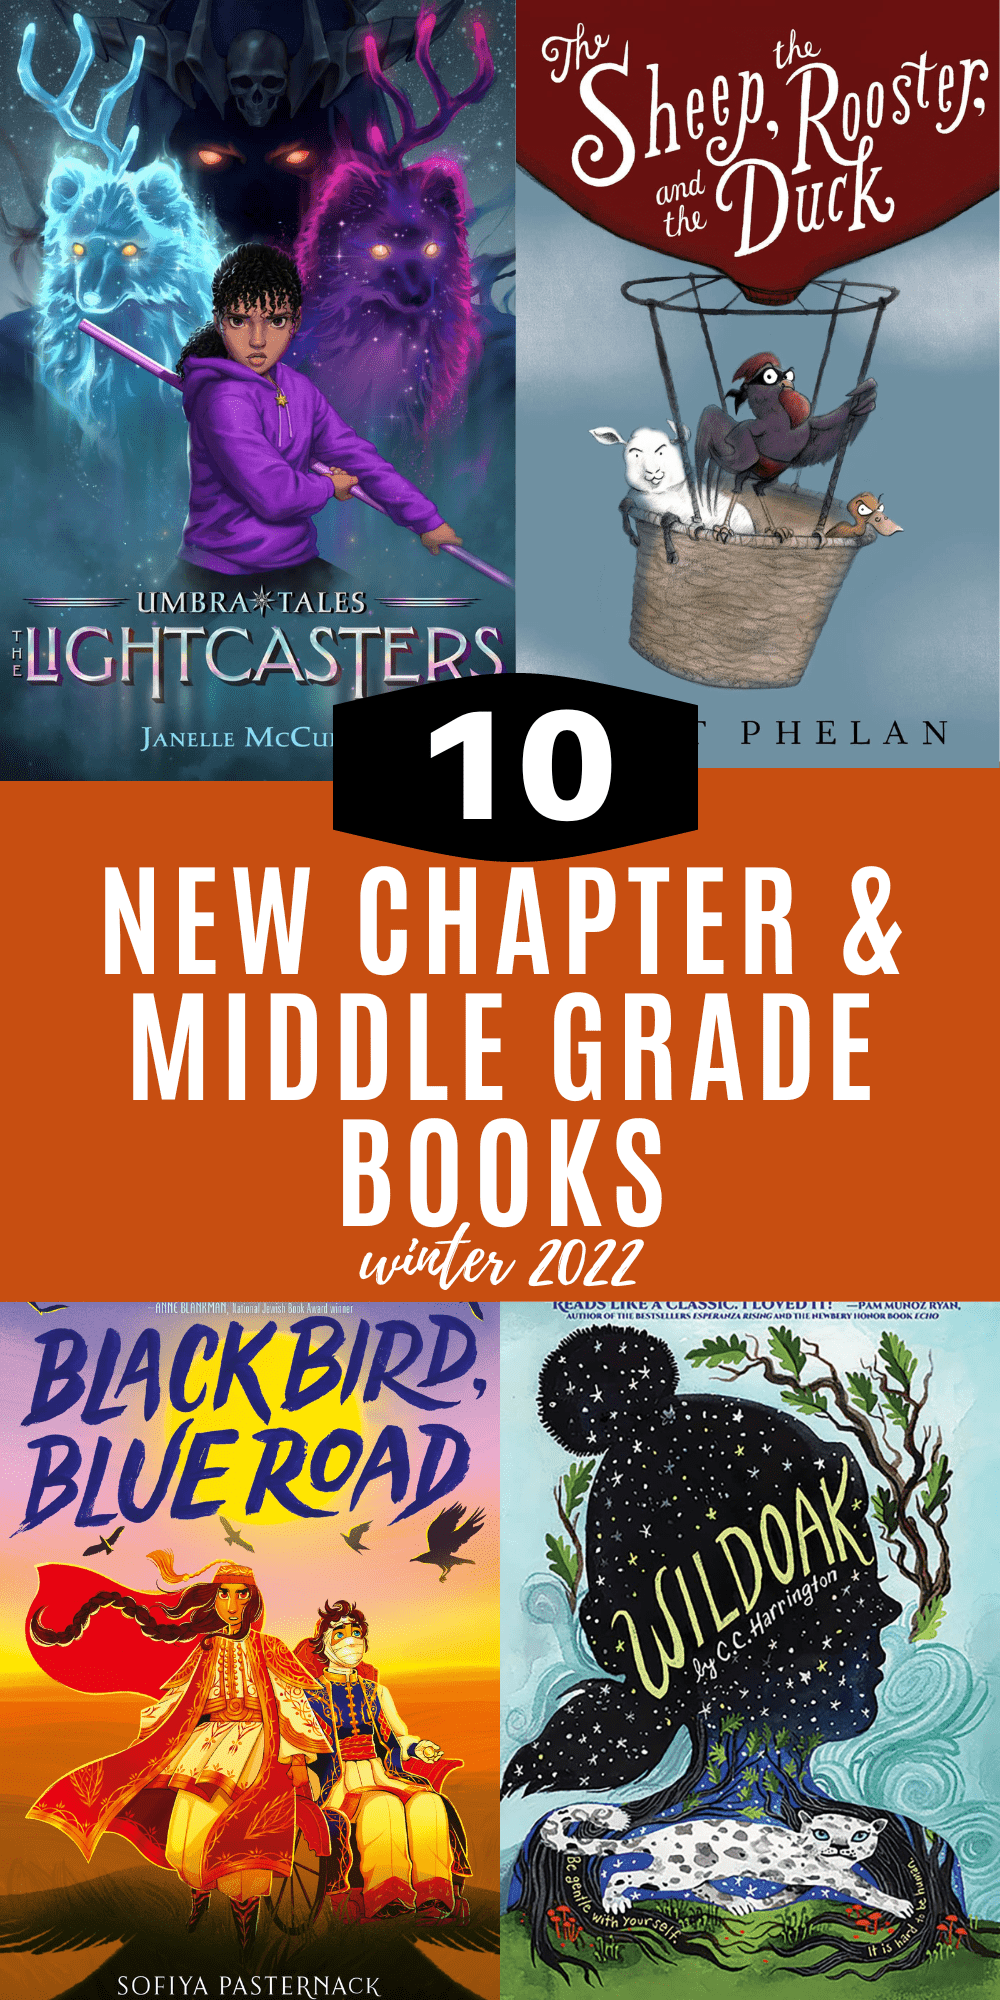 10 new chapter and middle grade books, December 2022